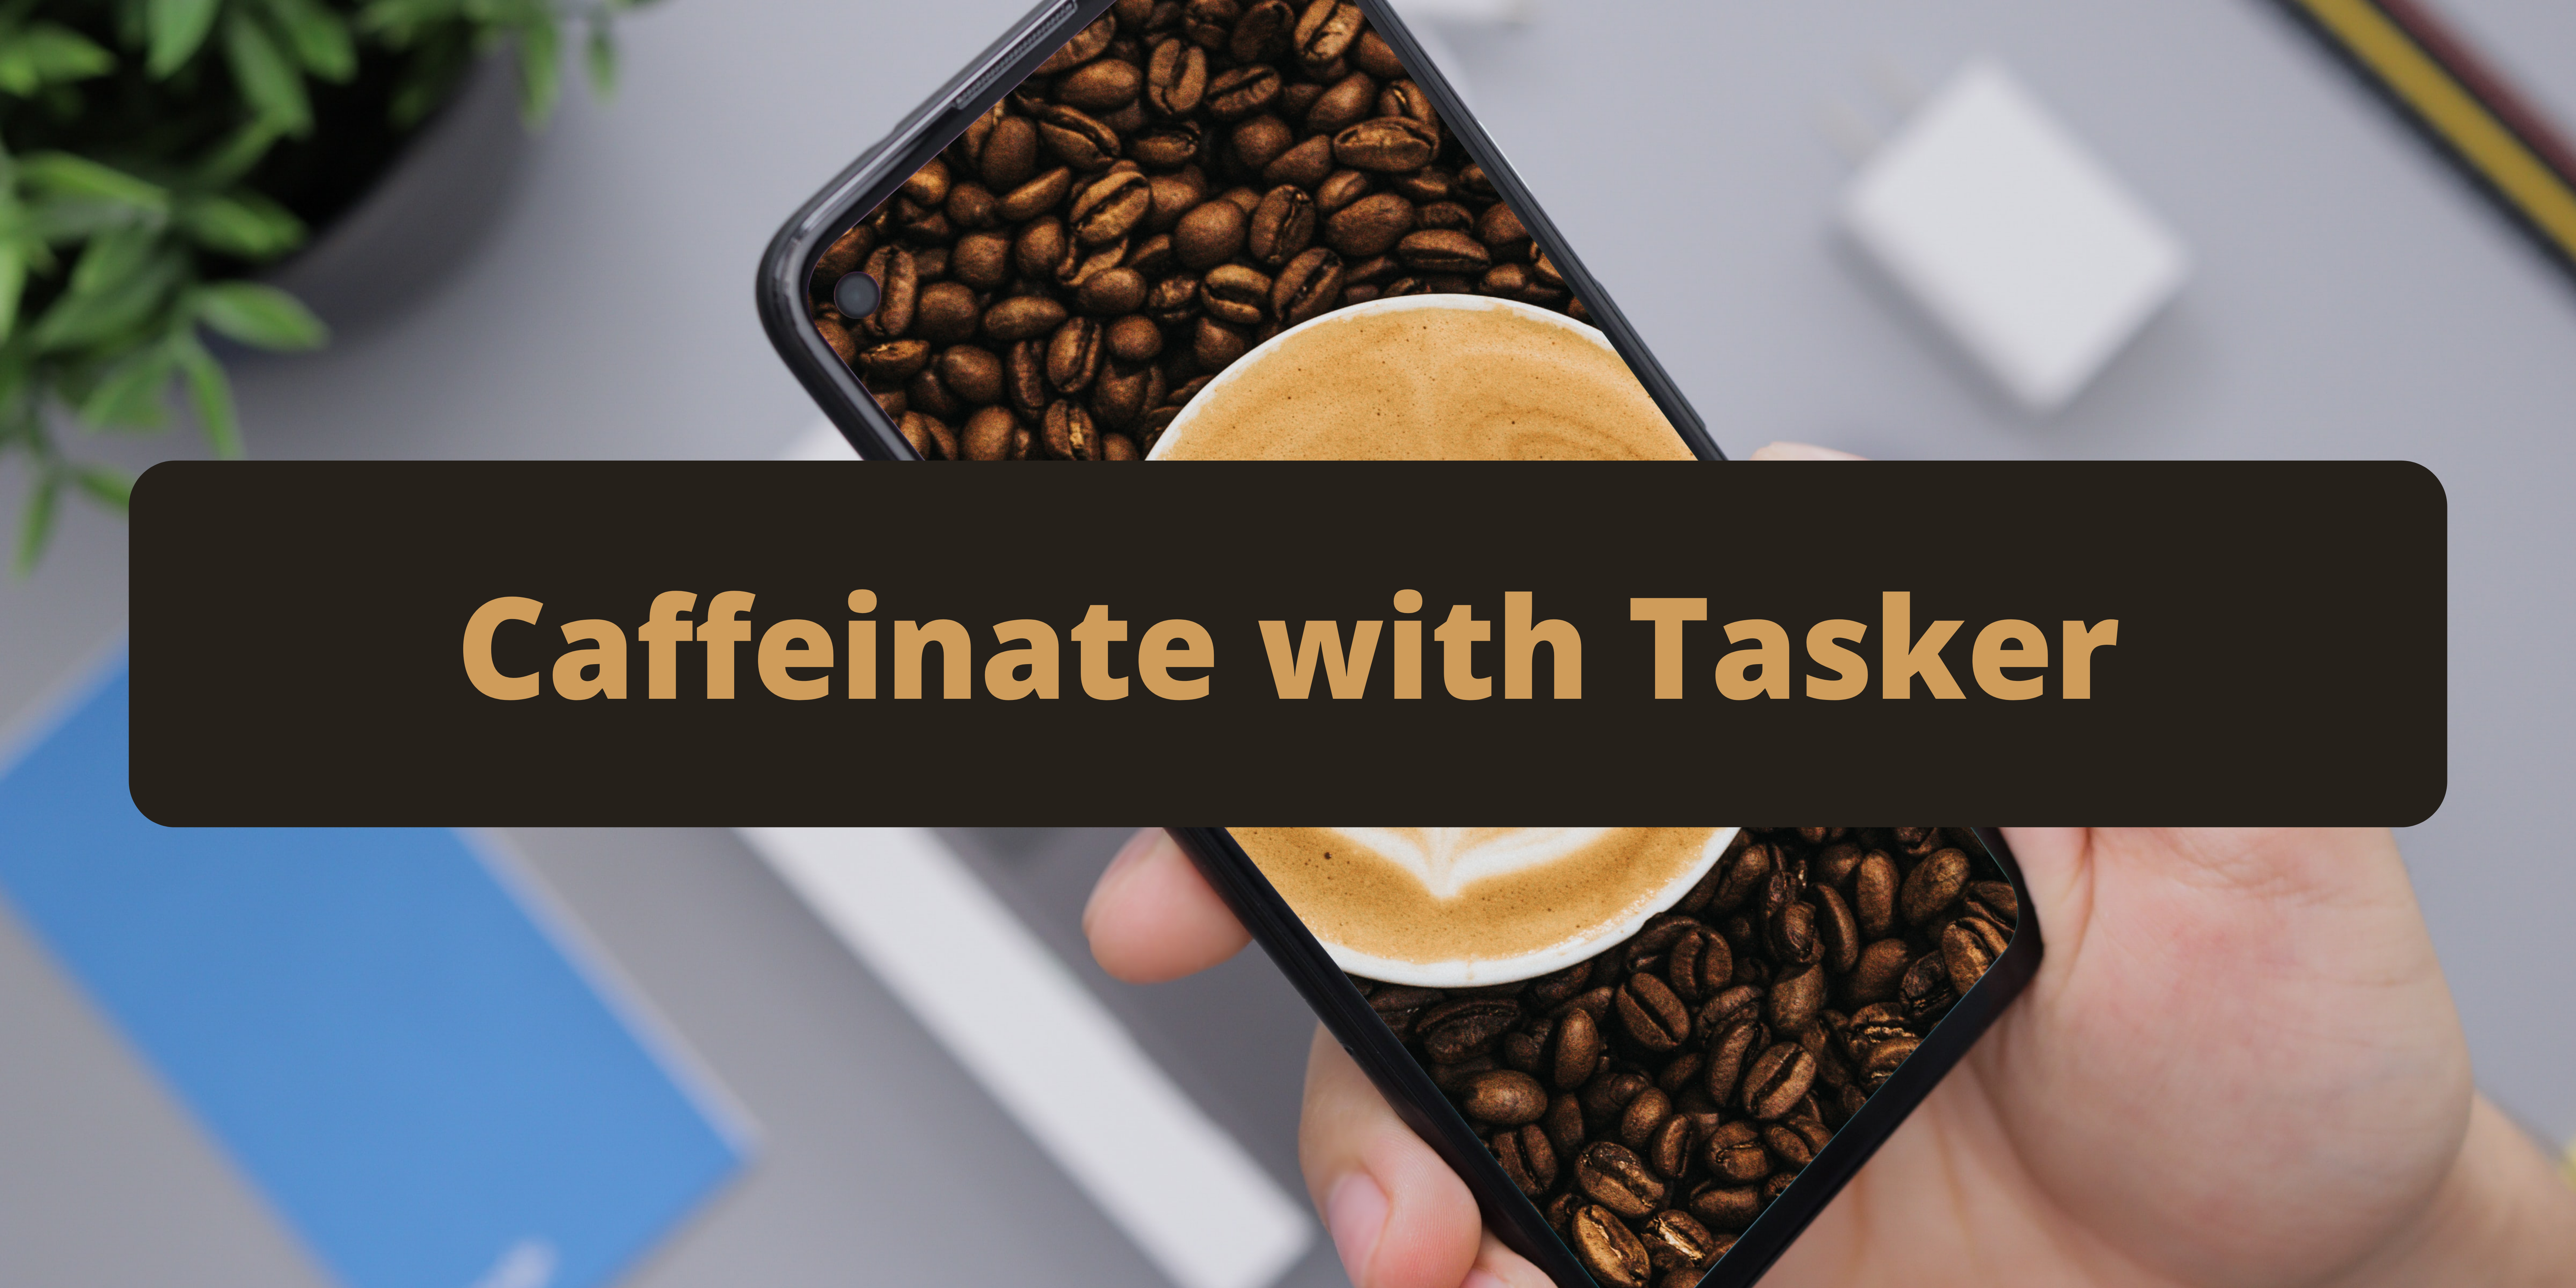 crack Sada Vittig Caffeinate with Tasker. There are several apps called… | by Alberto Piras |  Geek Culture | Medium